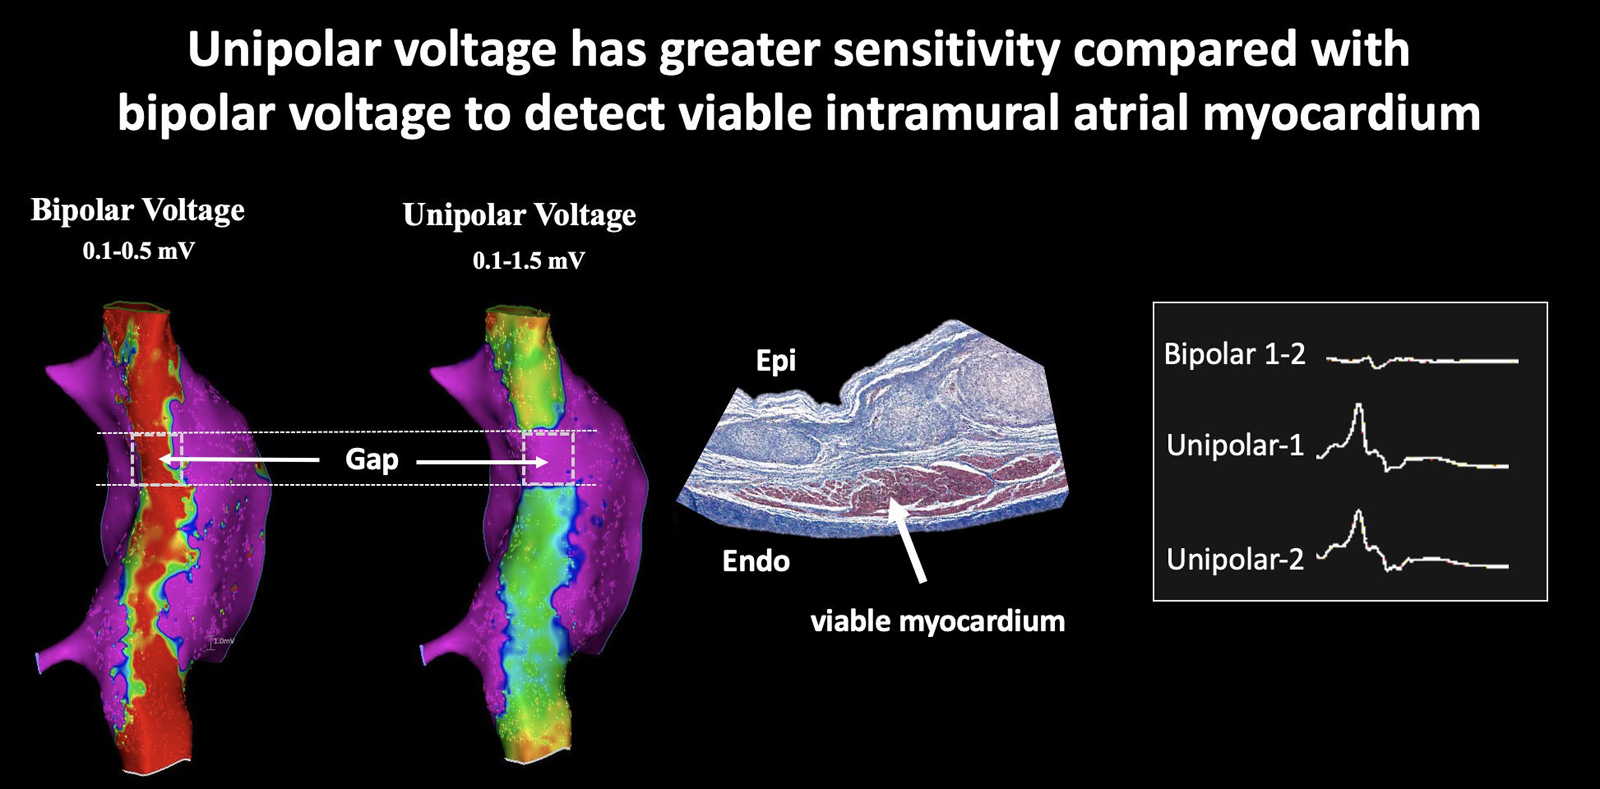 Atrial Endocardial Unipolar Voltage Mapping for Detection of Viable Intramural Myocardium: A Proof-of-Concept Study